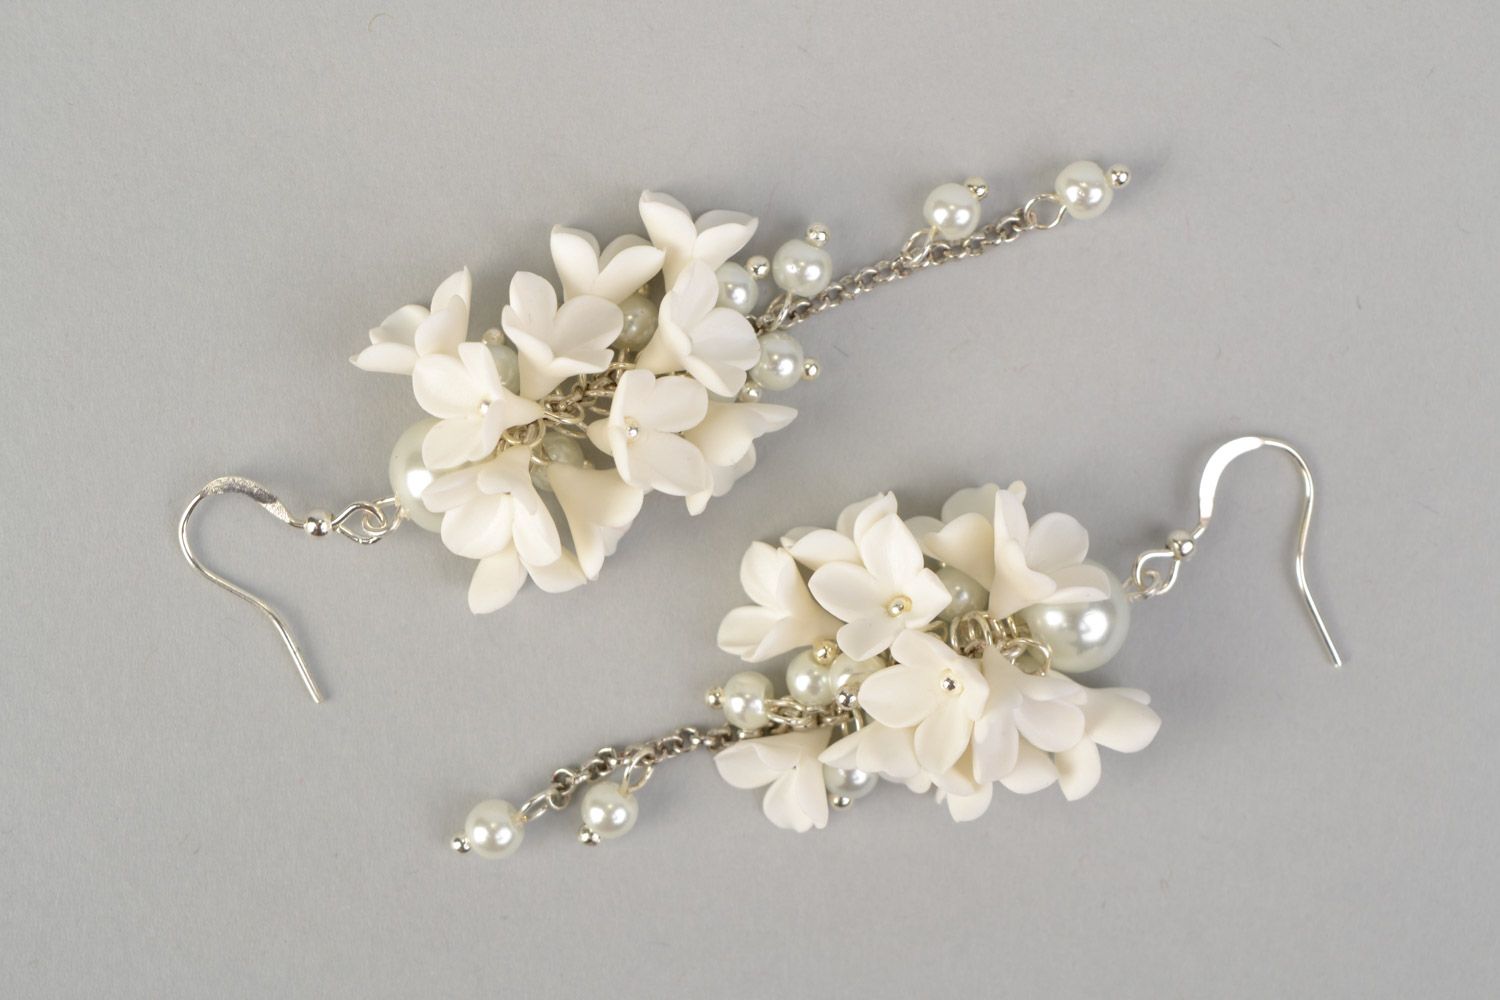 Handmade wedding dangling earrings with white polymer clay flowers and glass beads photo 3